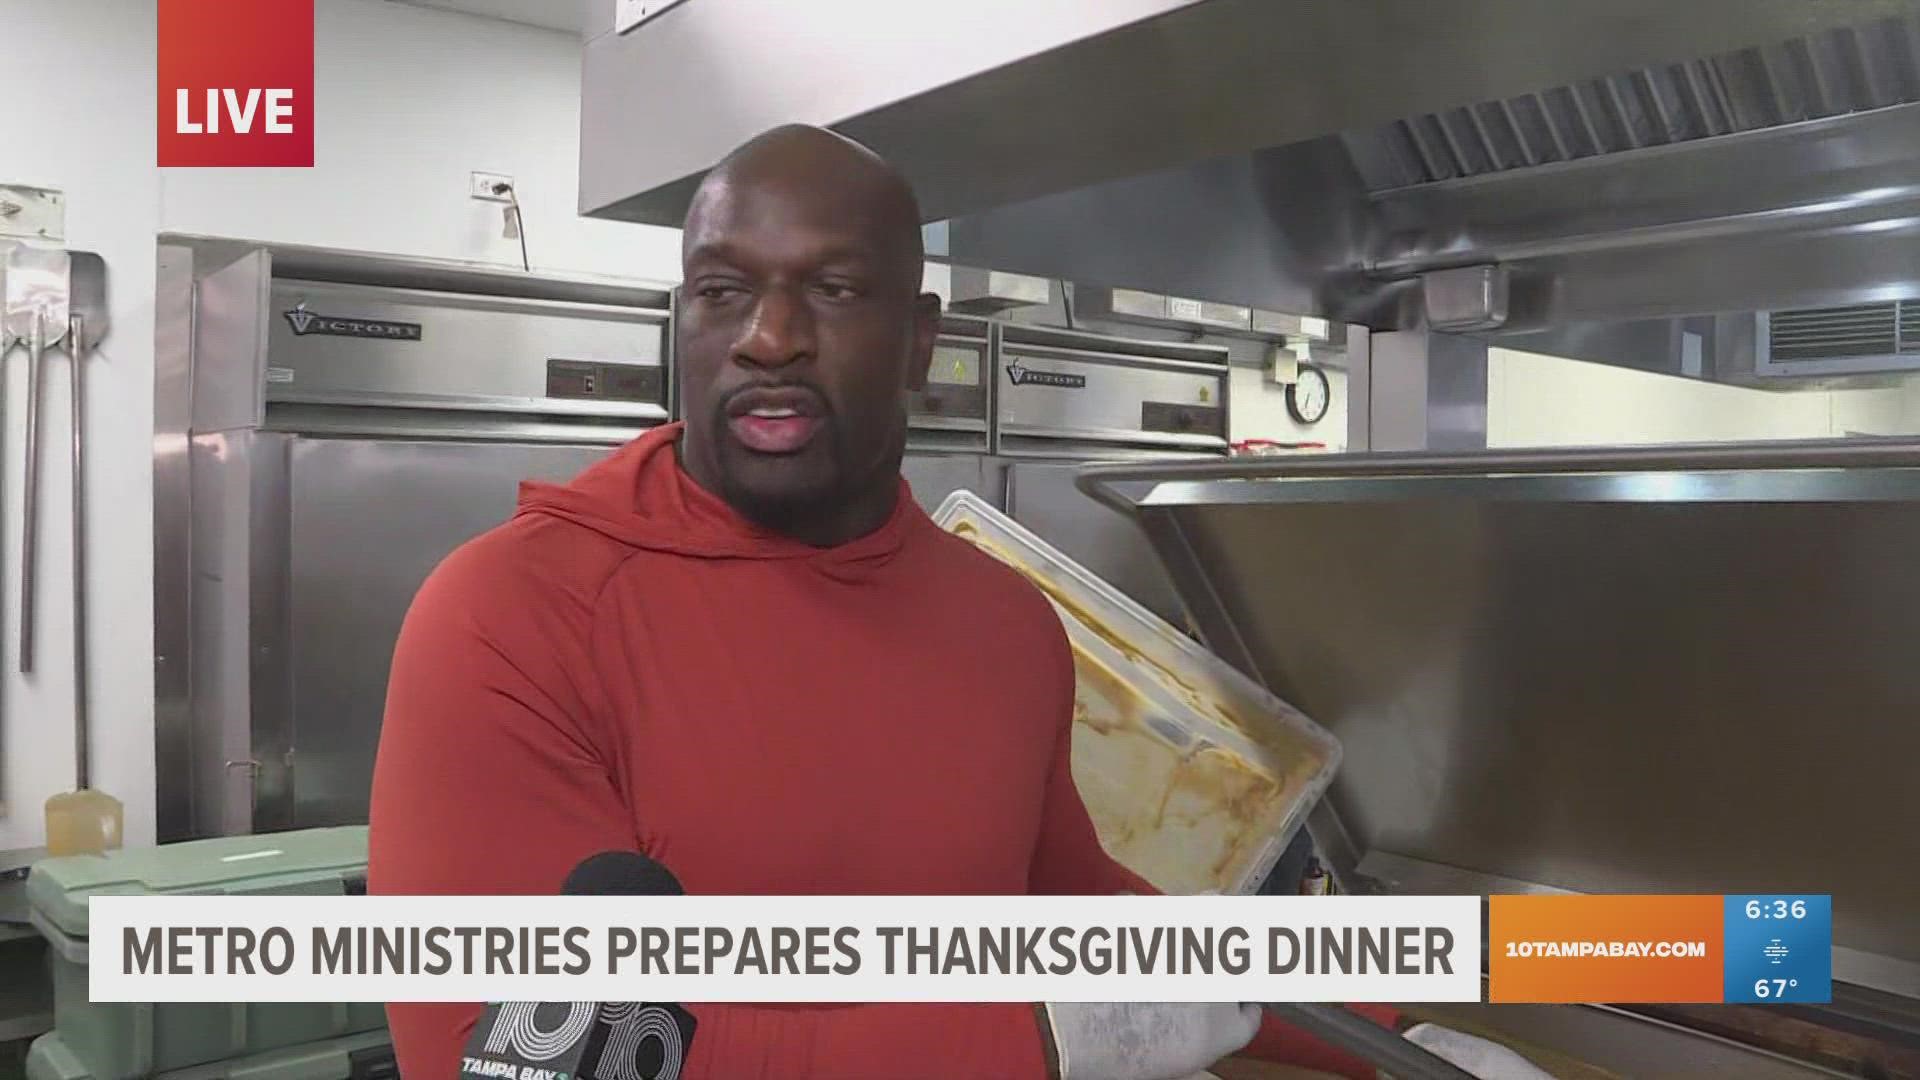 Metropolitan Ministries is providing more than 10,000 meals to Tampa Bay area families who need them most on Thanksgiving.